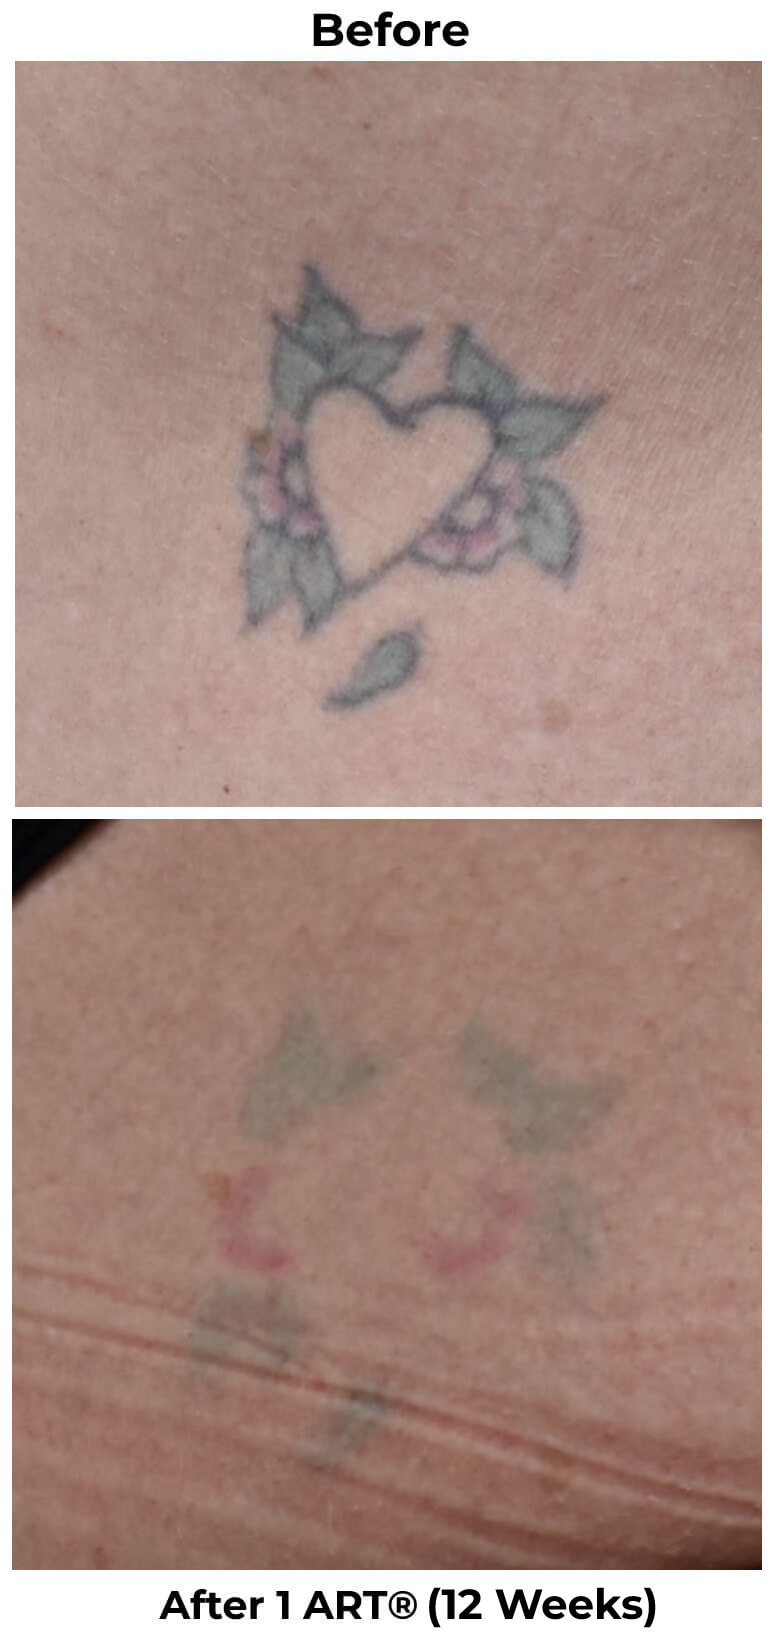 Tattoo Removal results in weeks